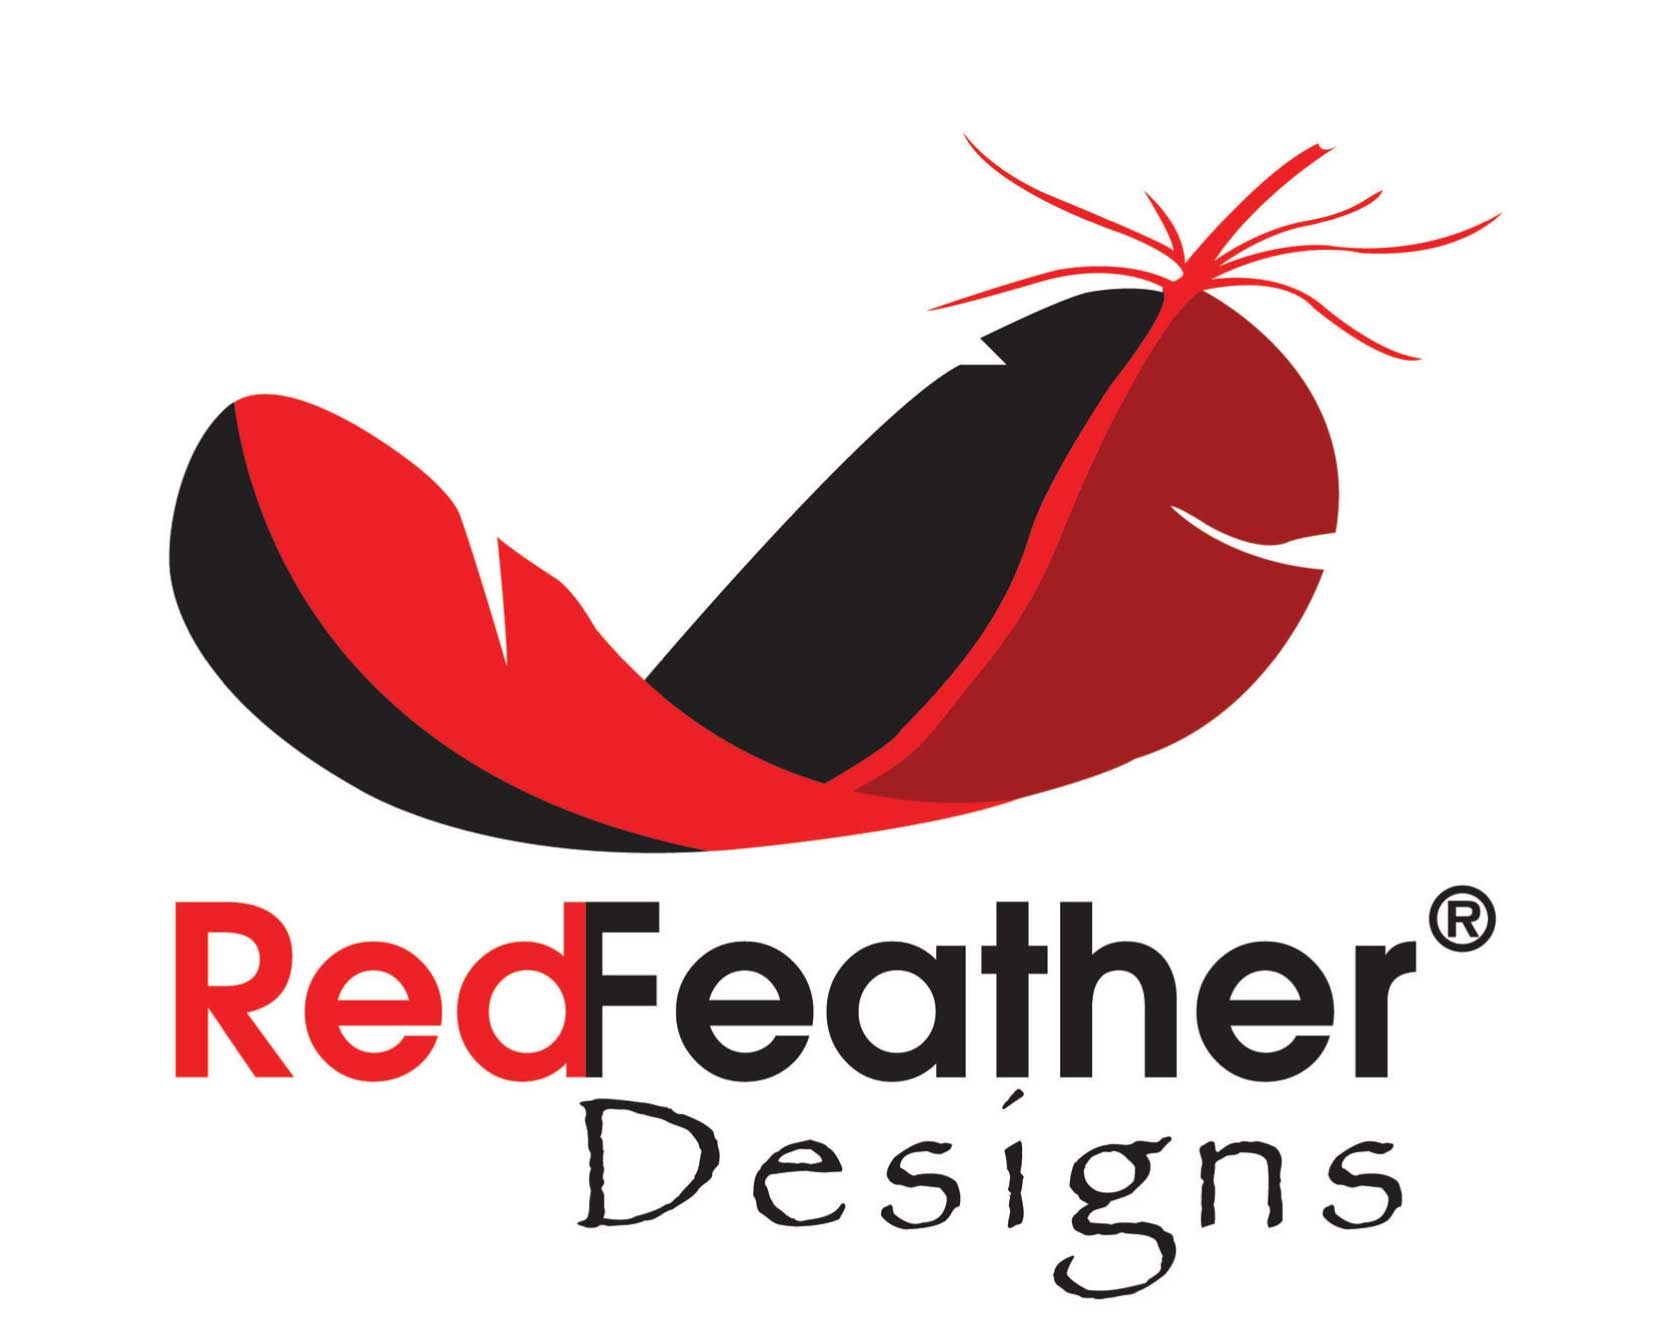 Red Feather Logo - red feather logo design - Croovs - Community of Designers